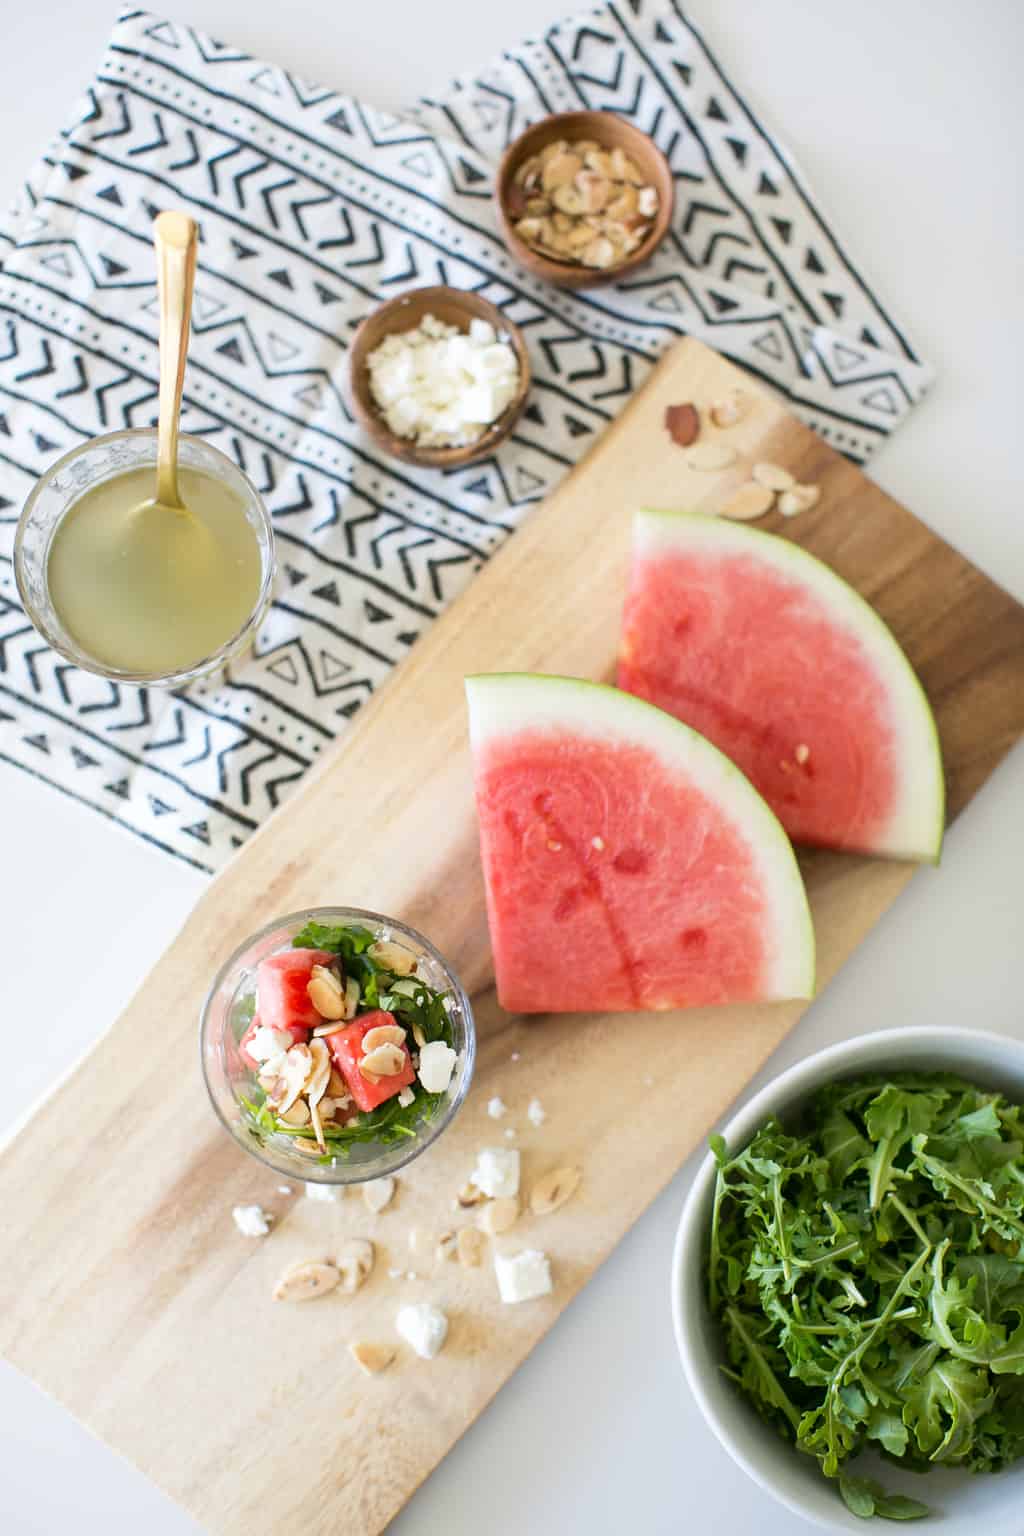 Celebrate Summer Flavors with This Easy Watermelon Mint Salad